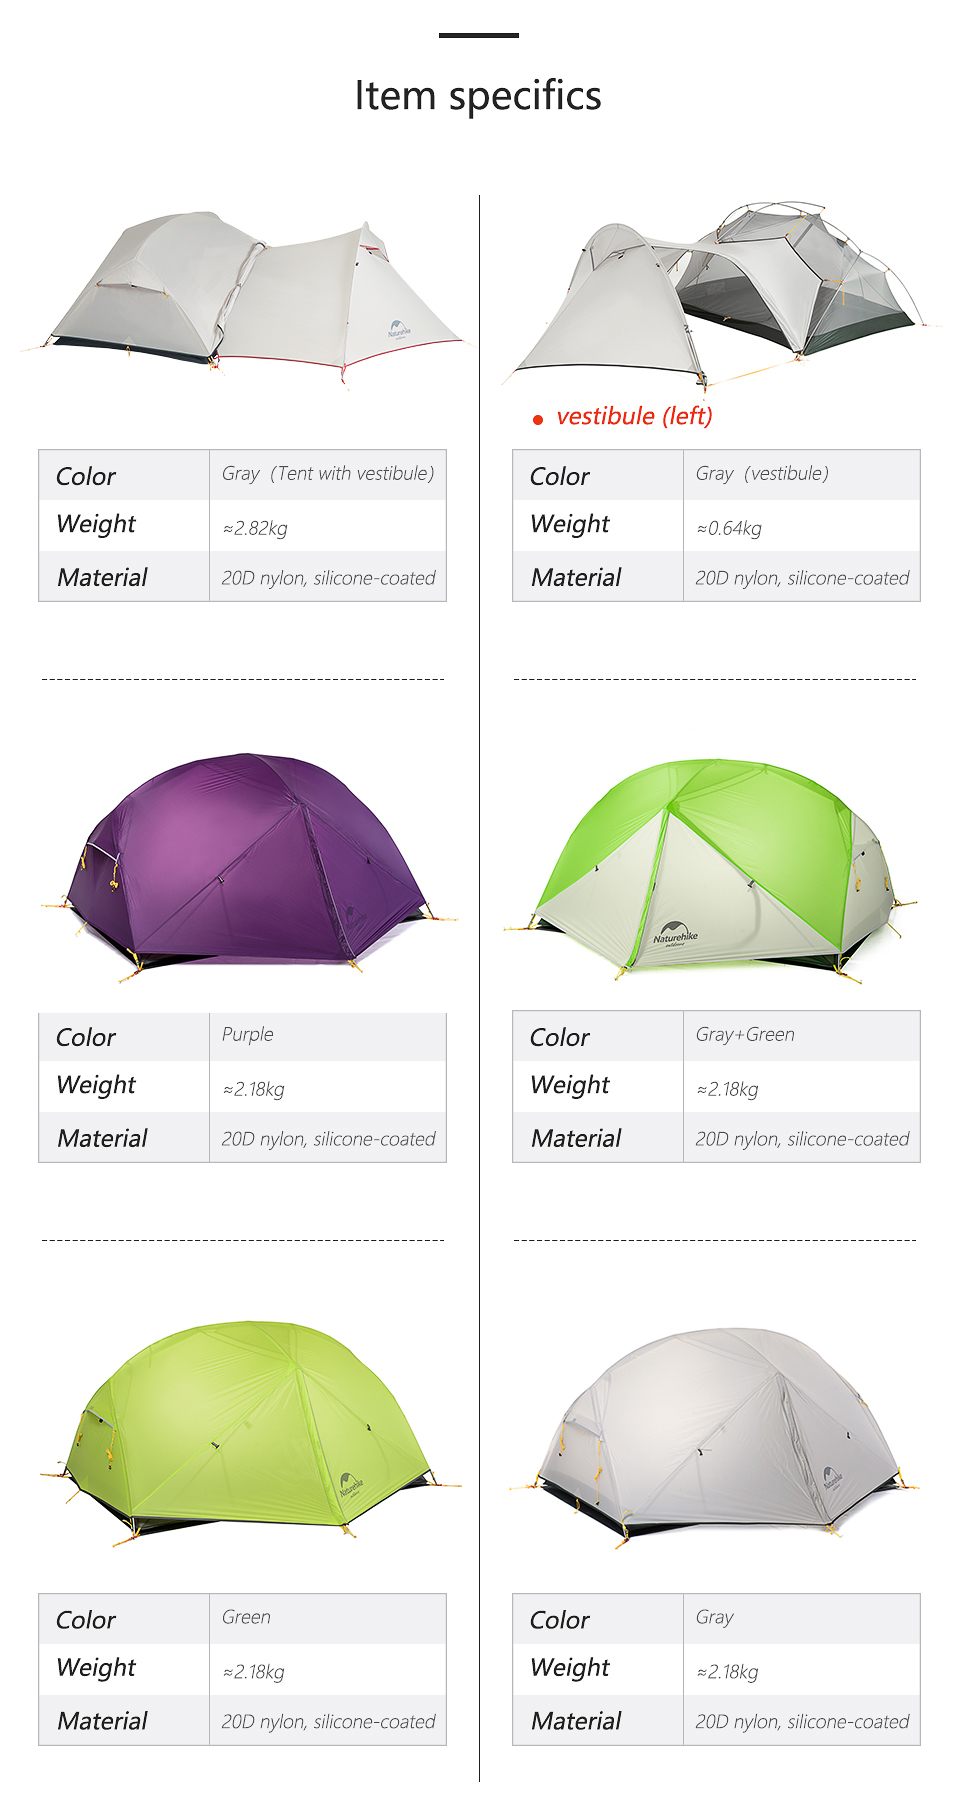 Goat 20D Nylon Fabic Double Layer Waterproof Outdoor Hiking Camping Tents 2 persons Ultralight Beach tent